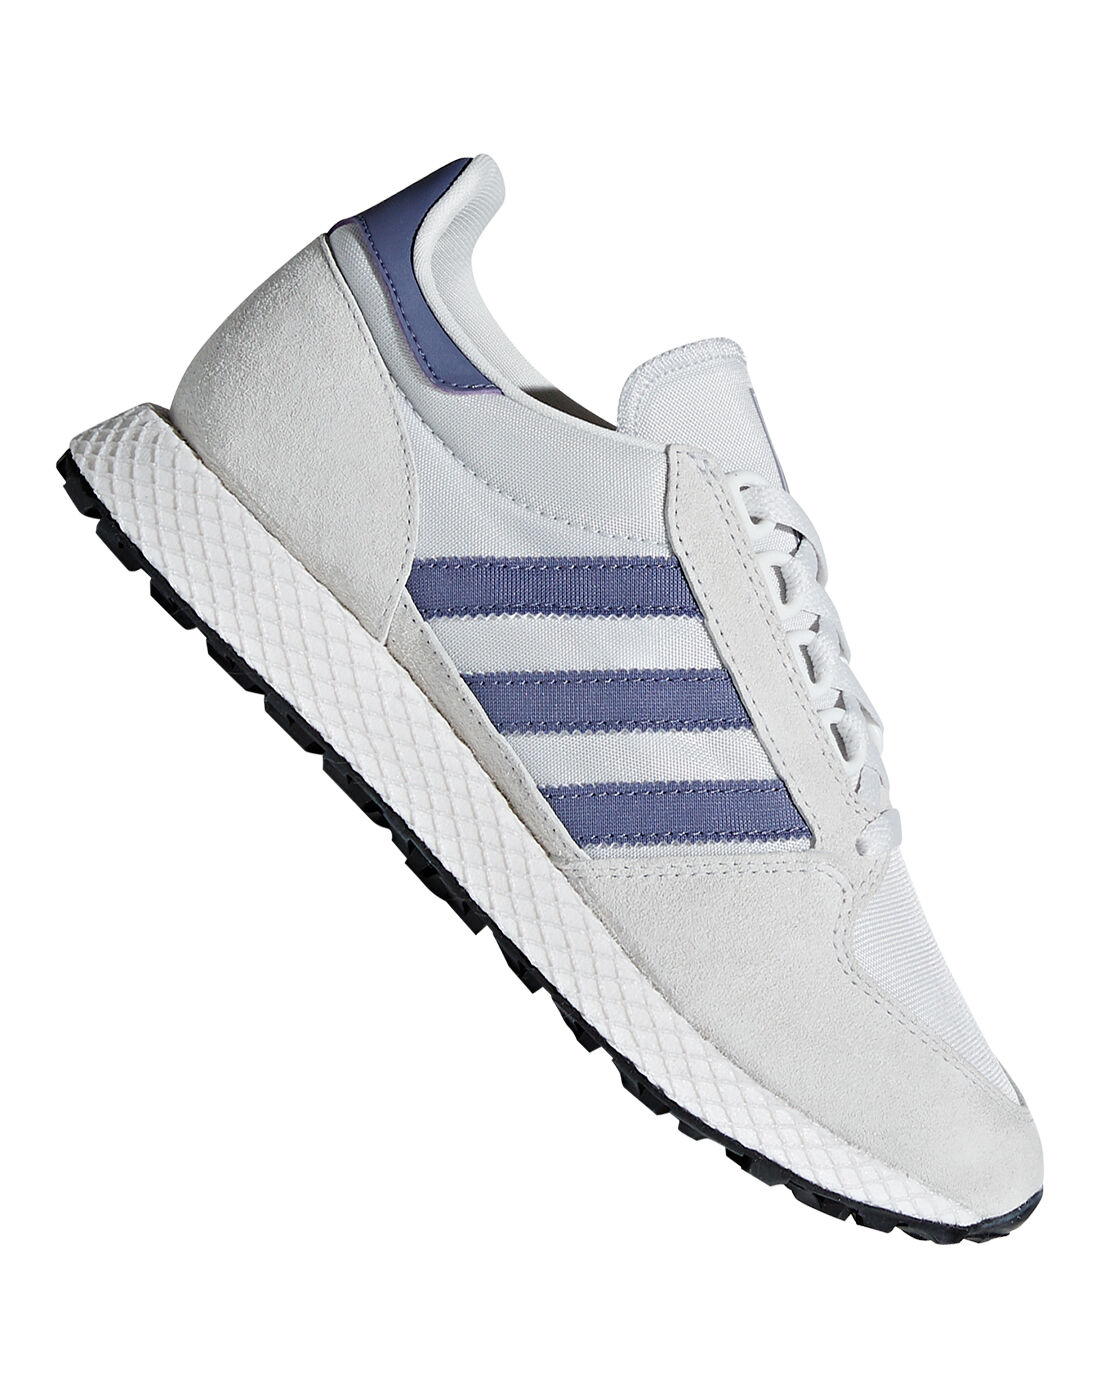 adidas forest grove shoes womens